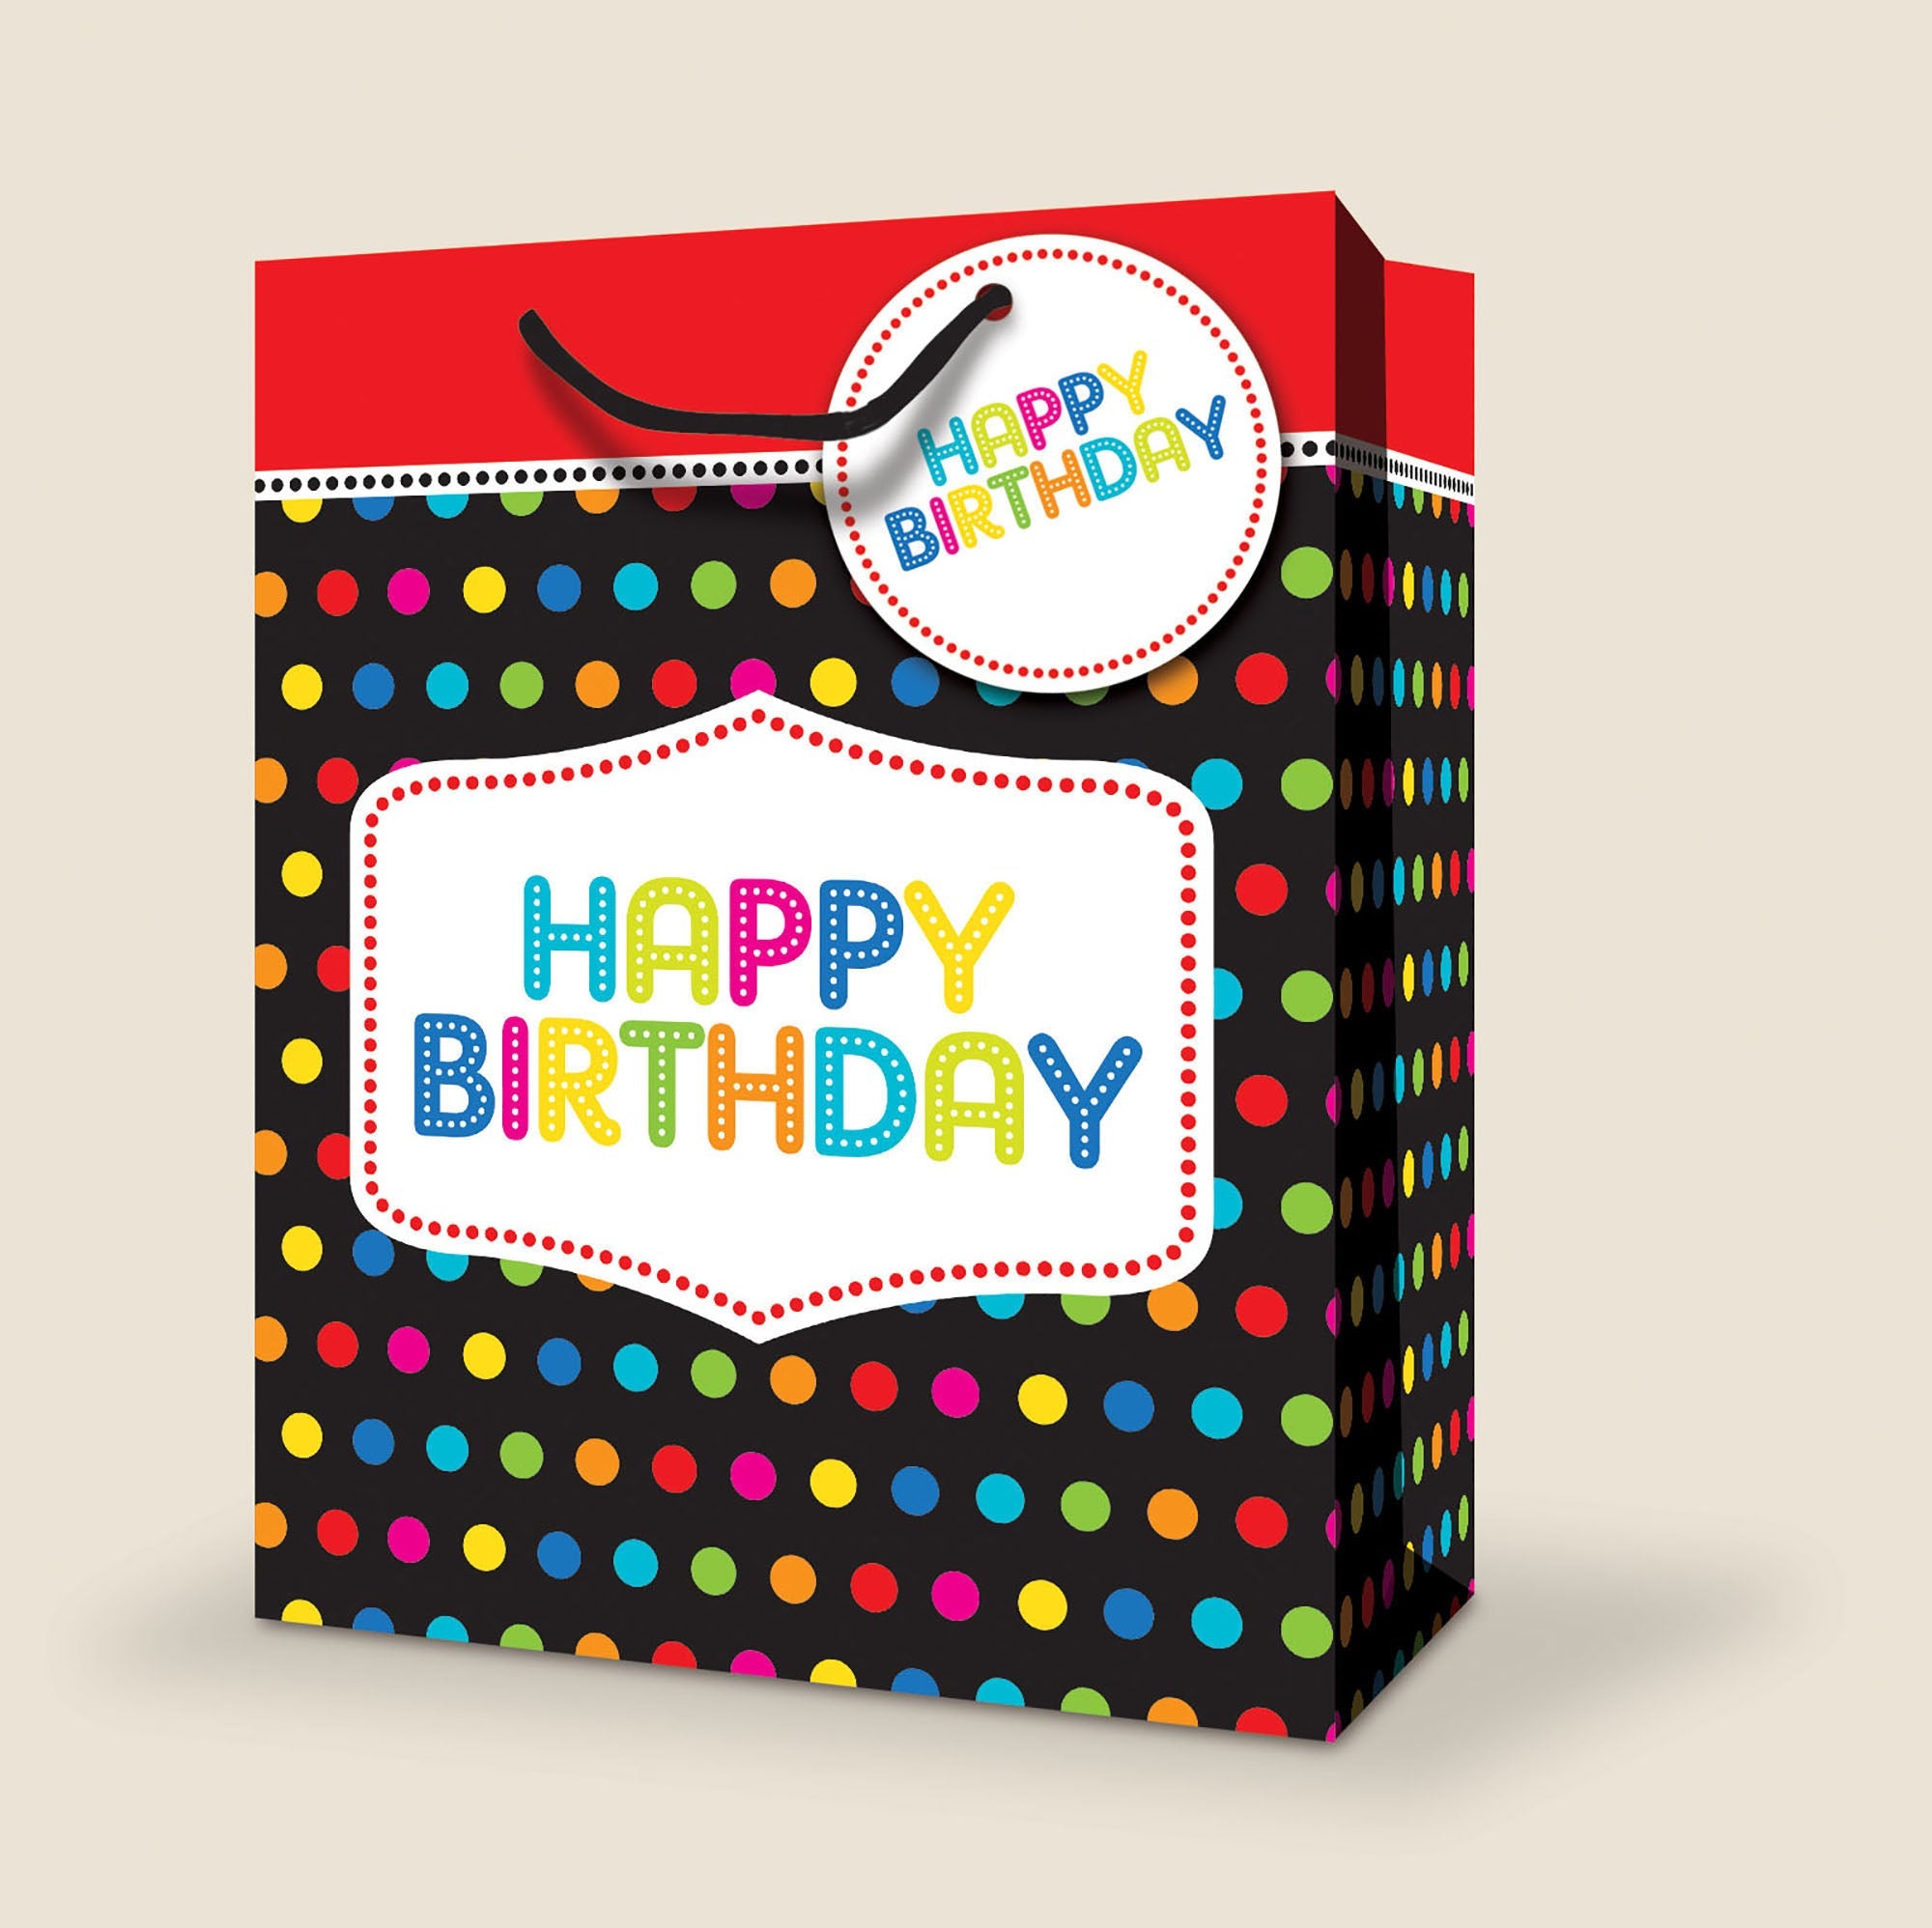 Mill Brook Gift Bag - Birthday Small 5.75x4x2.5in